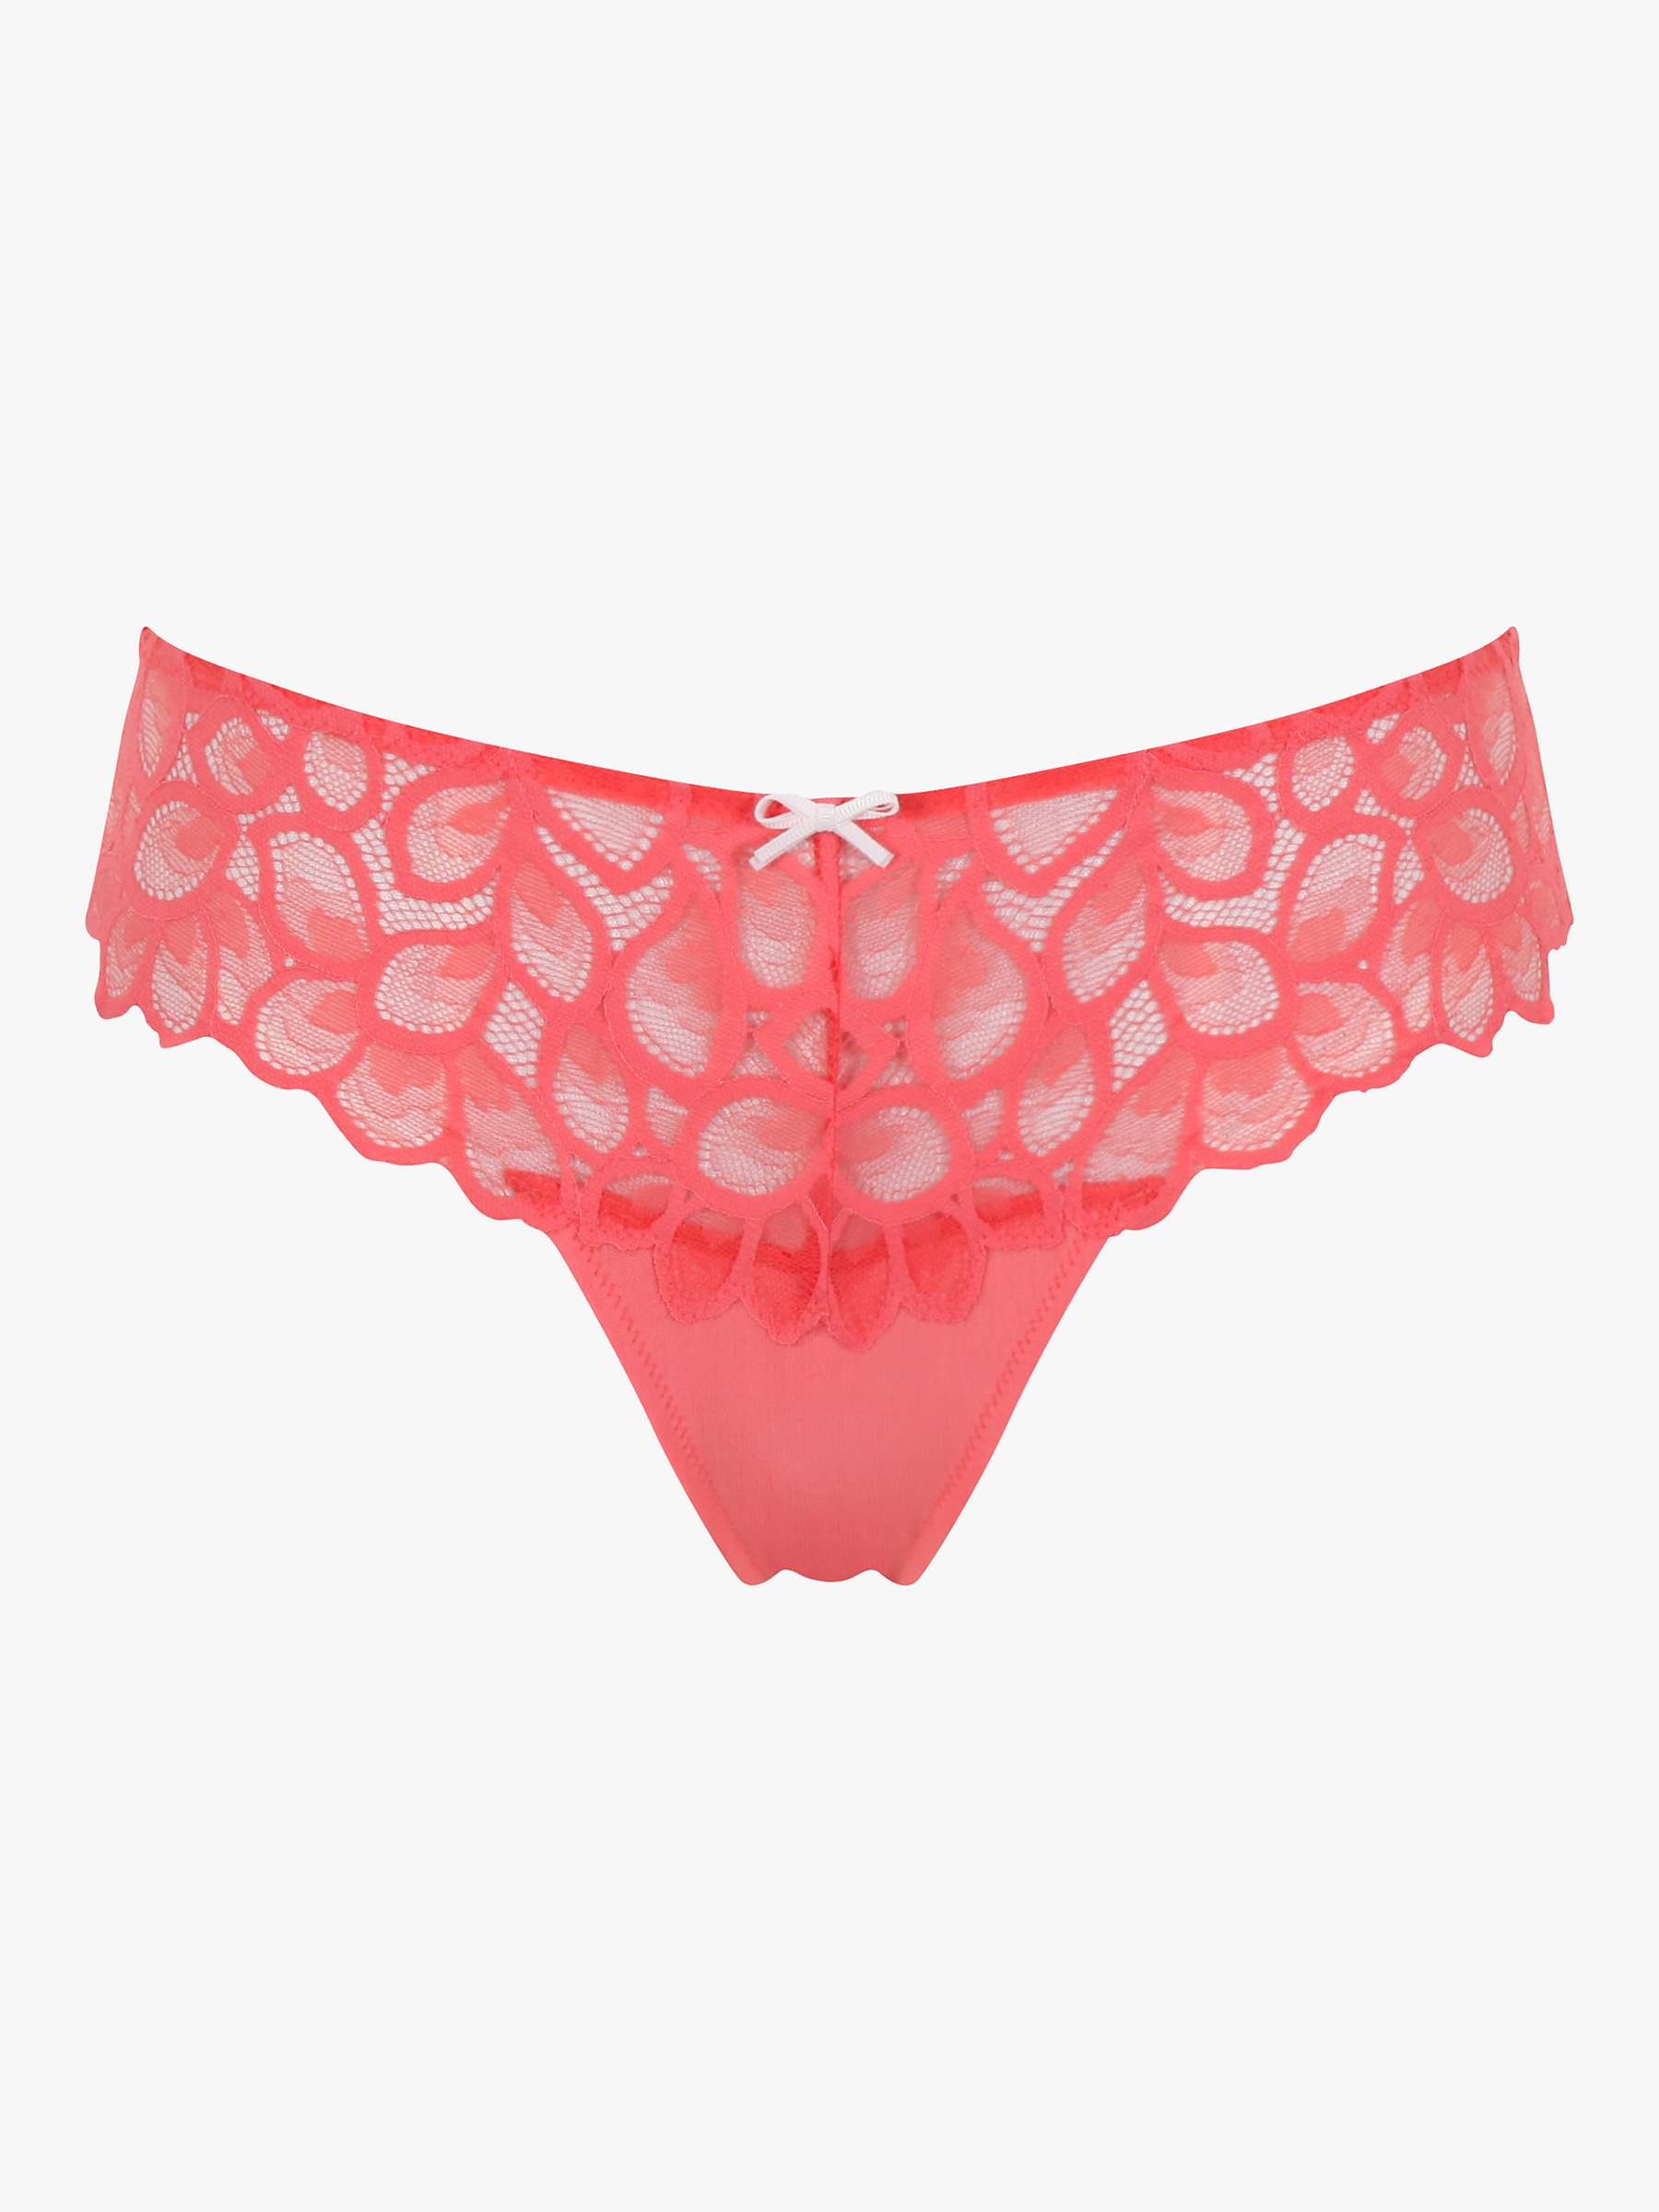 Buy Panache Allure Lace Panel Thong, Coral Online at johnlewis.com